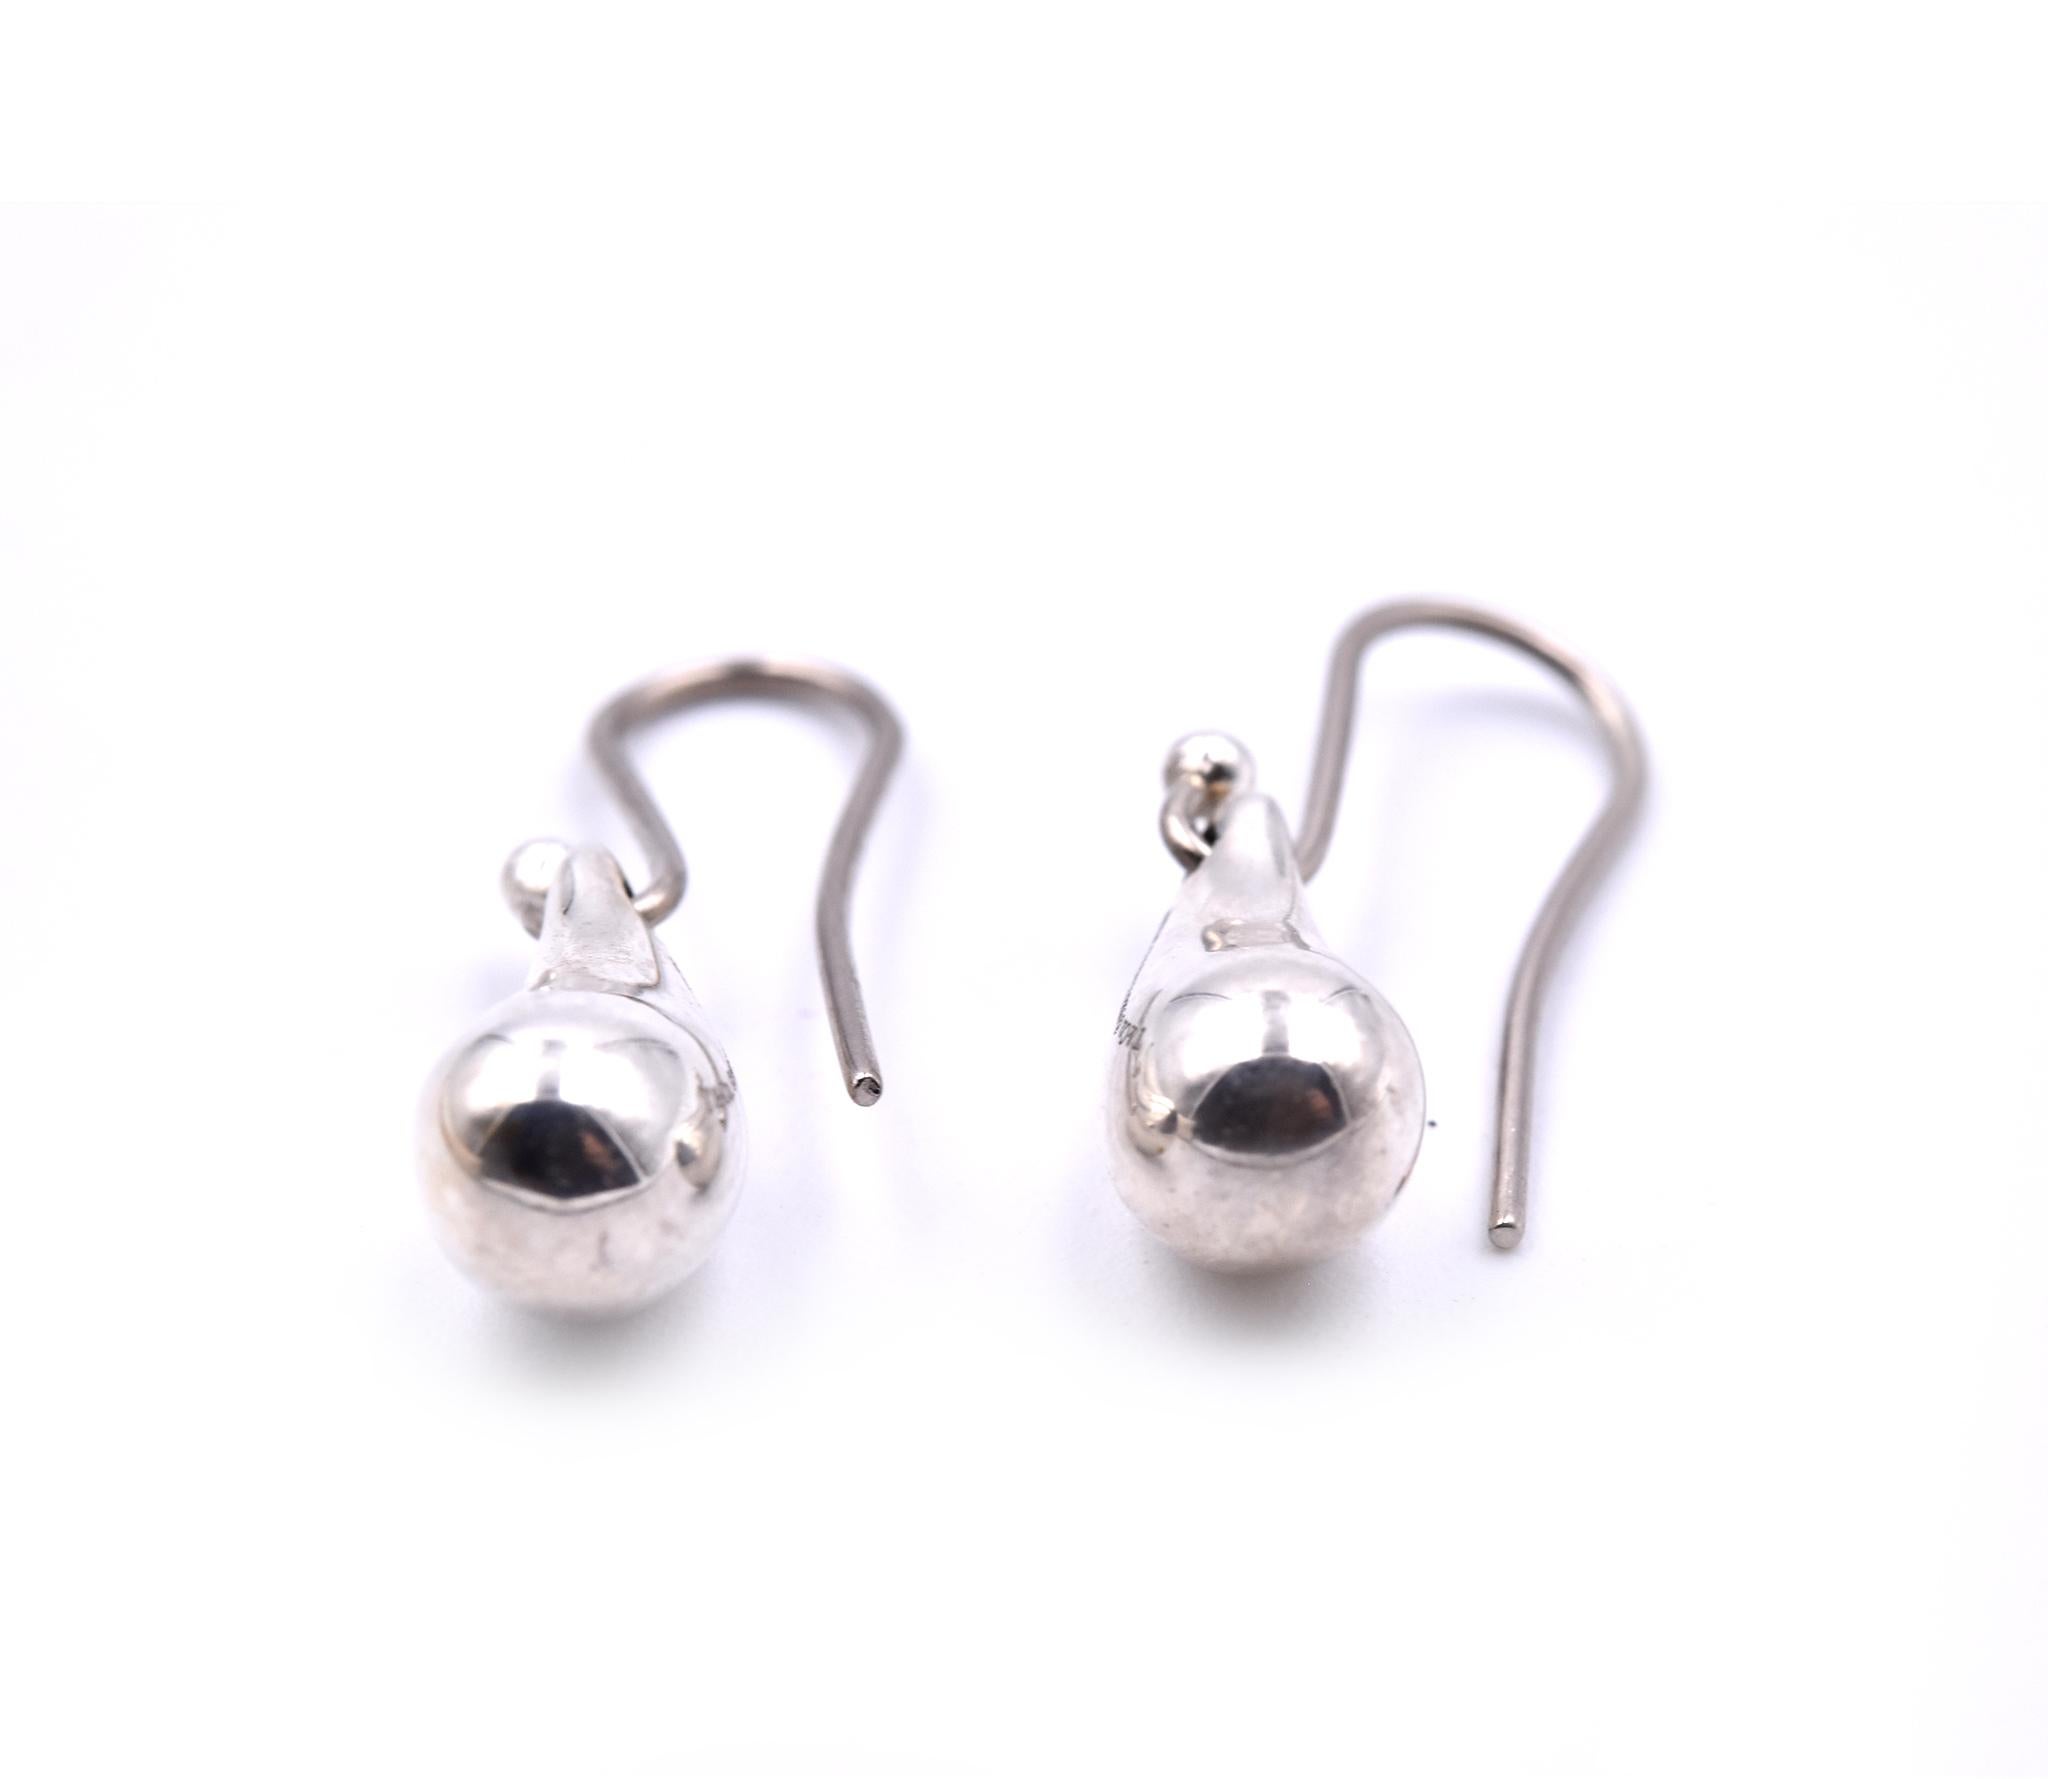 Designer: Elsa Peretti, Tiffany & Co.
Material: sterling silver
Fastenings: shepherd’s hook 
Dimensions: earrings are 22.20mm by 5.87mm
Weight: 3.97 grams